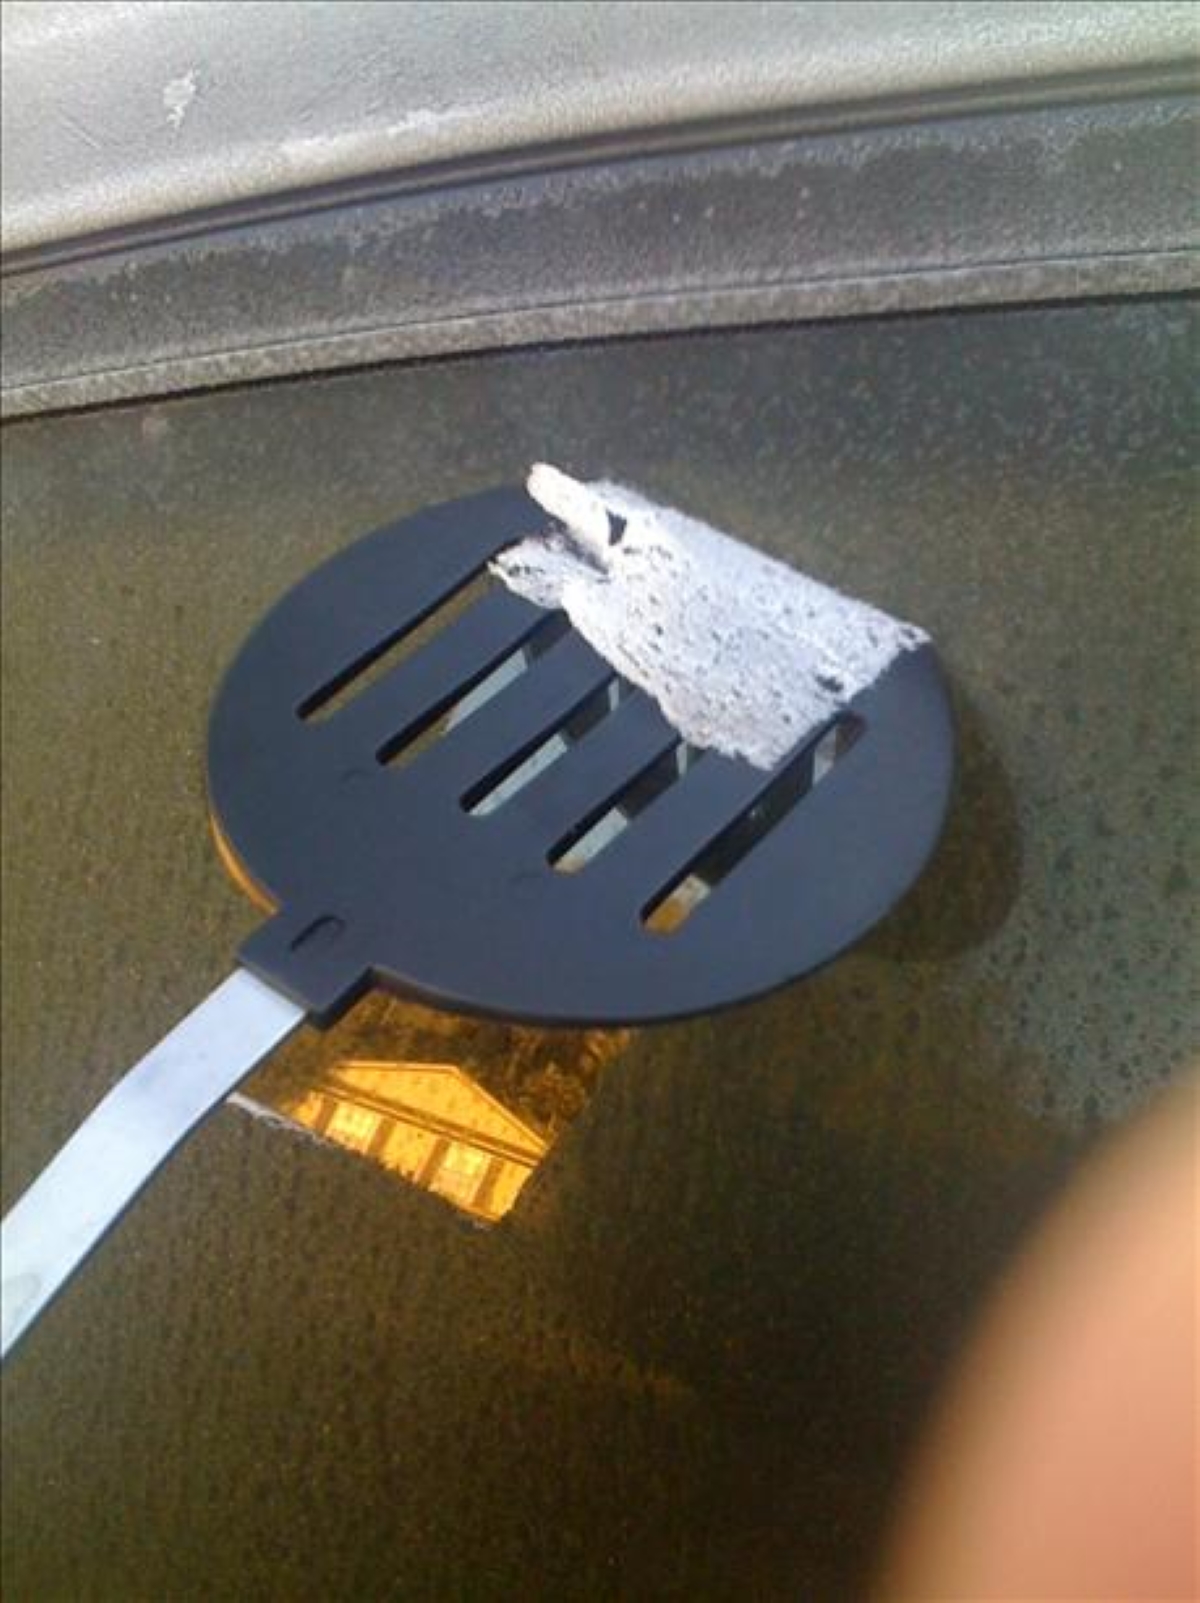 Things You Can Use When You Don't Have an Ice Scraper - spatula ice scraper